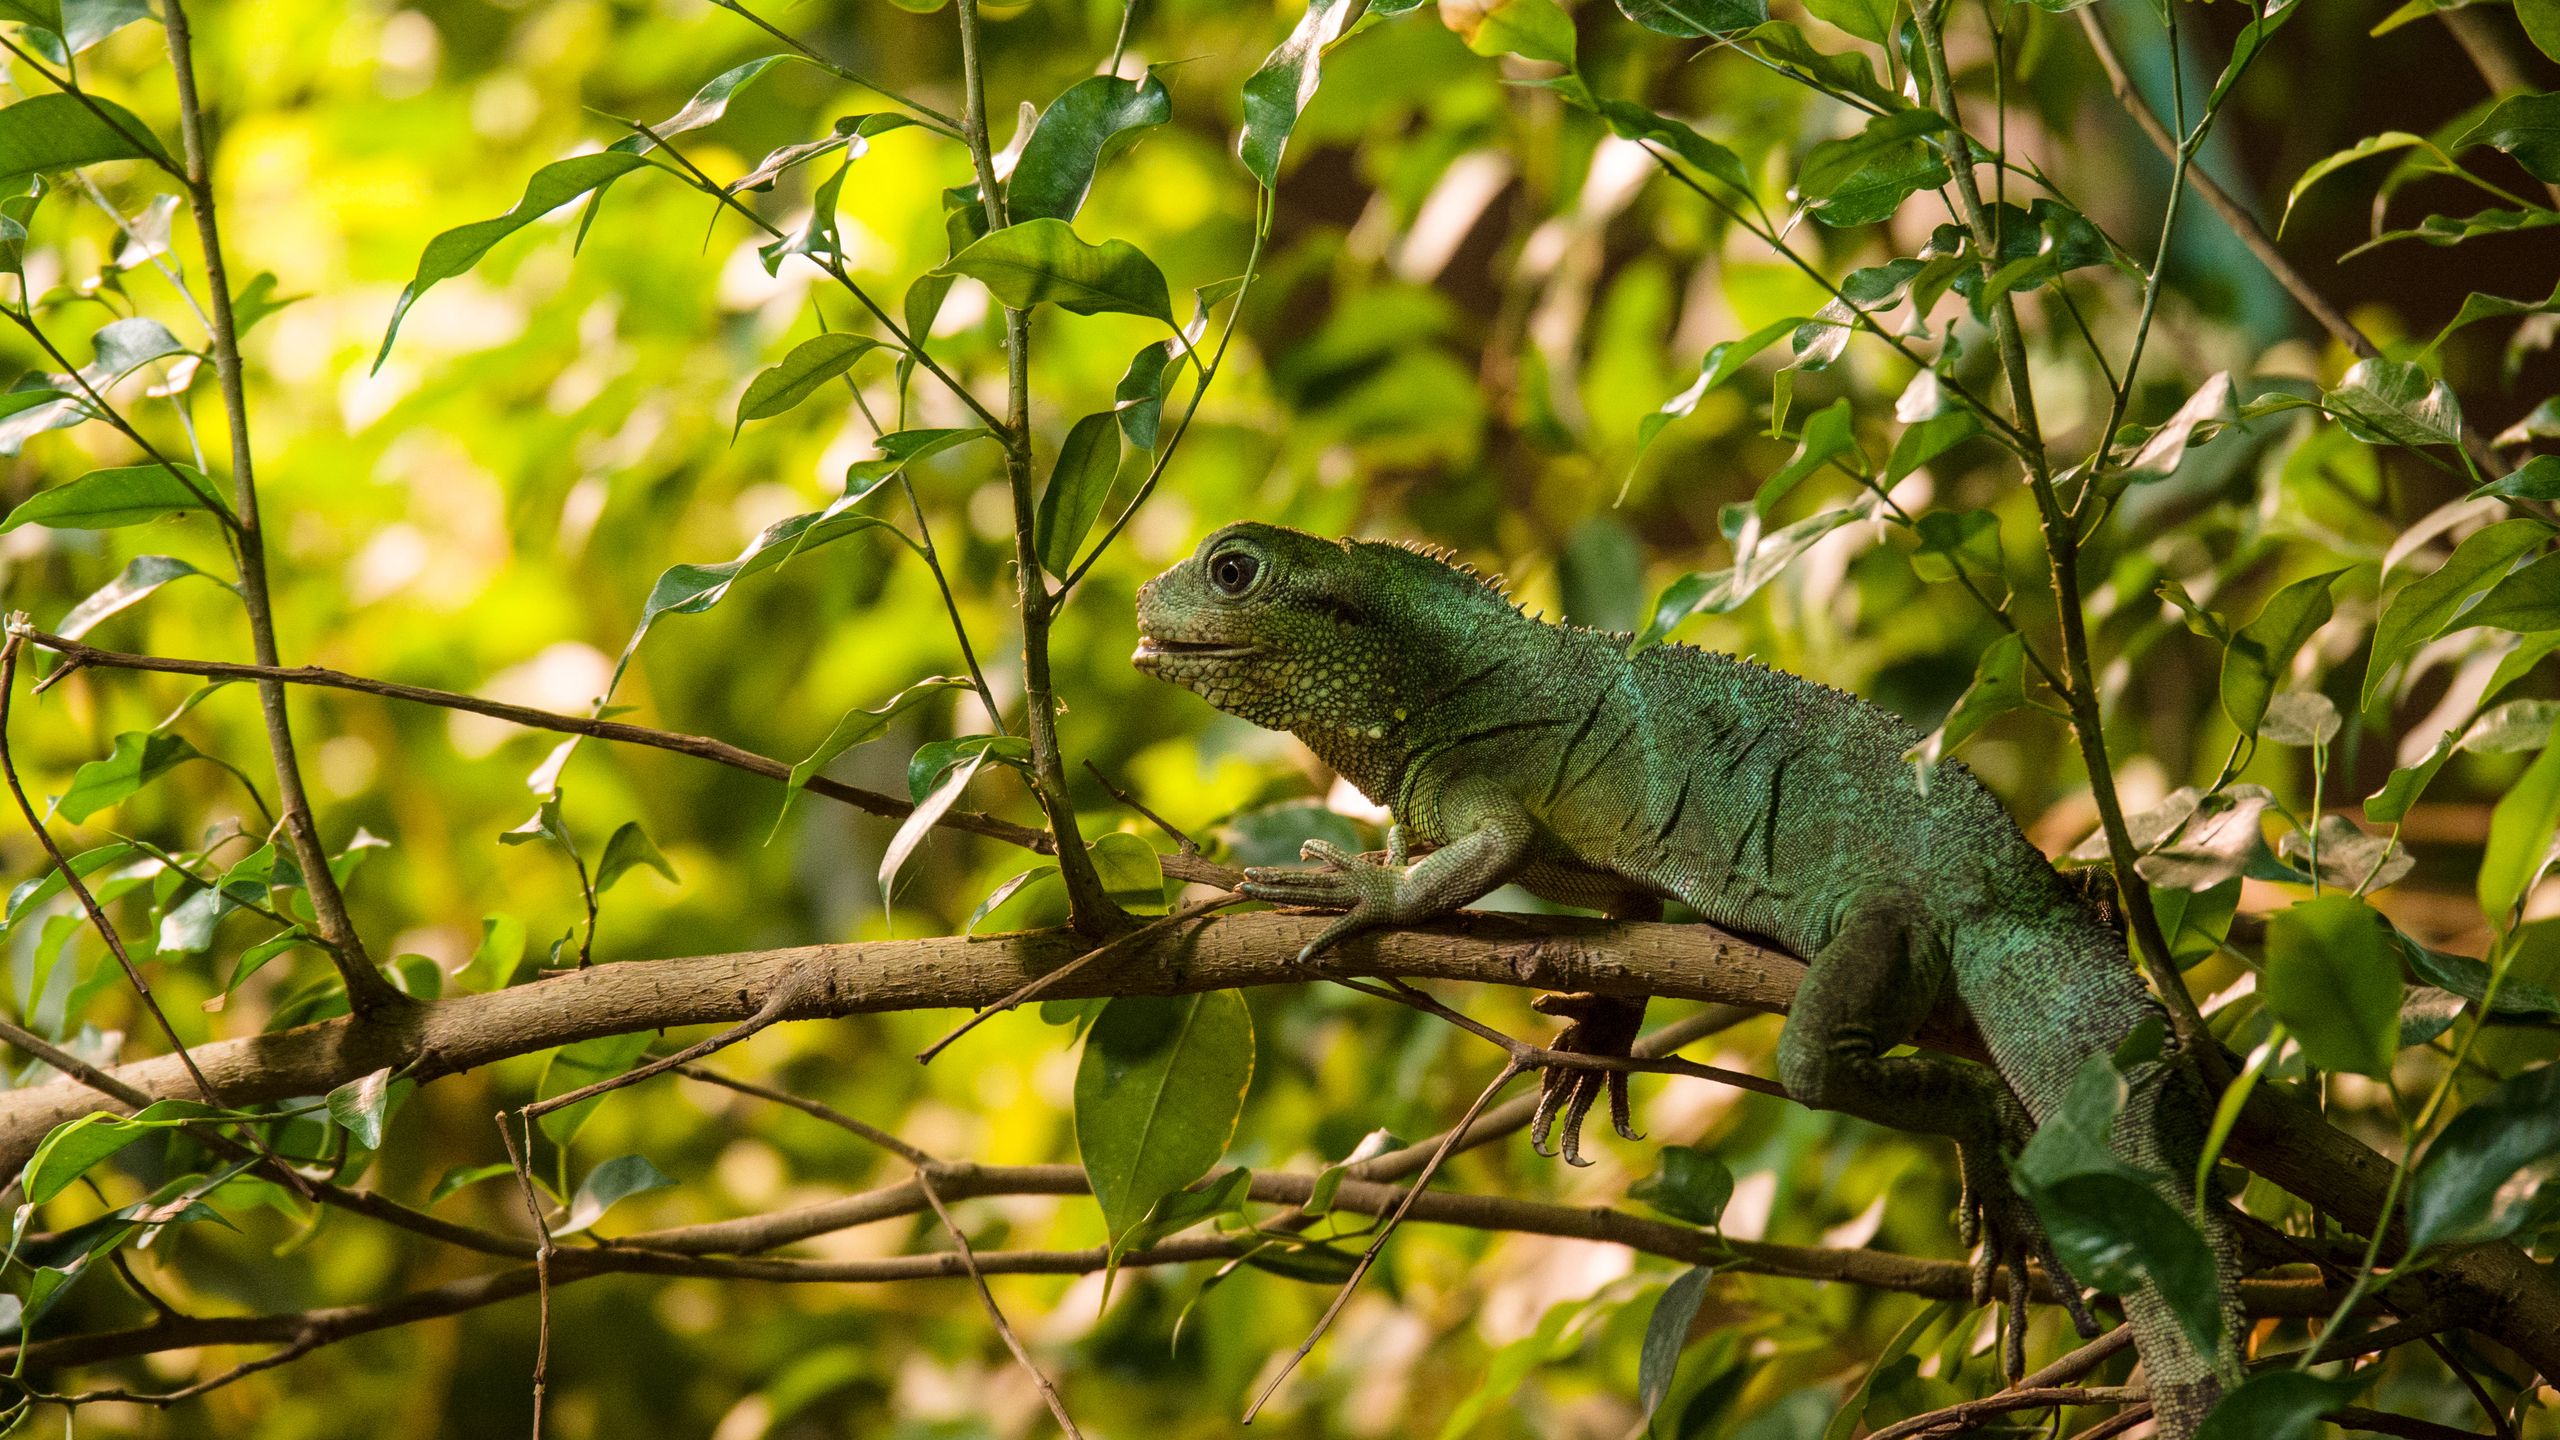 Download Wallpaper 2560x1440 Lizard Reptile Leaves Branches Green